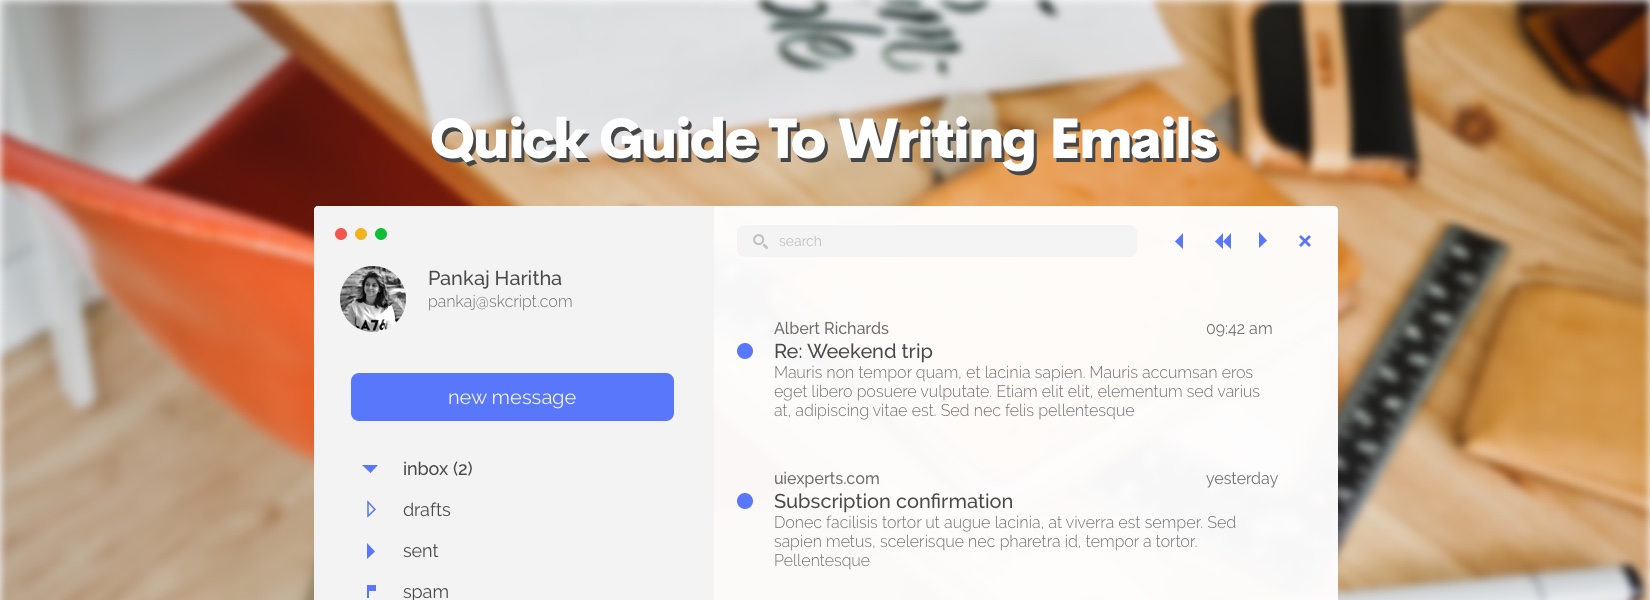 Quick Guide To Writing Emails